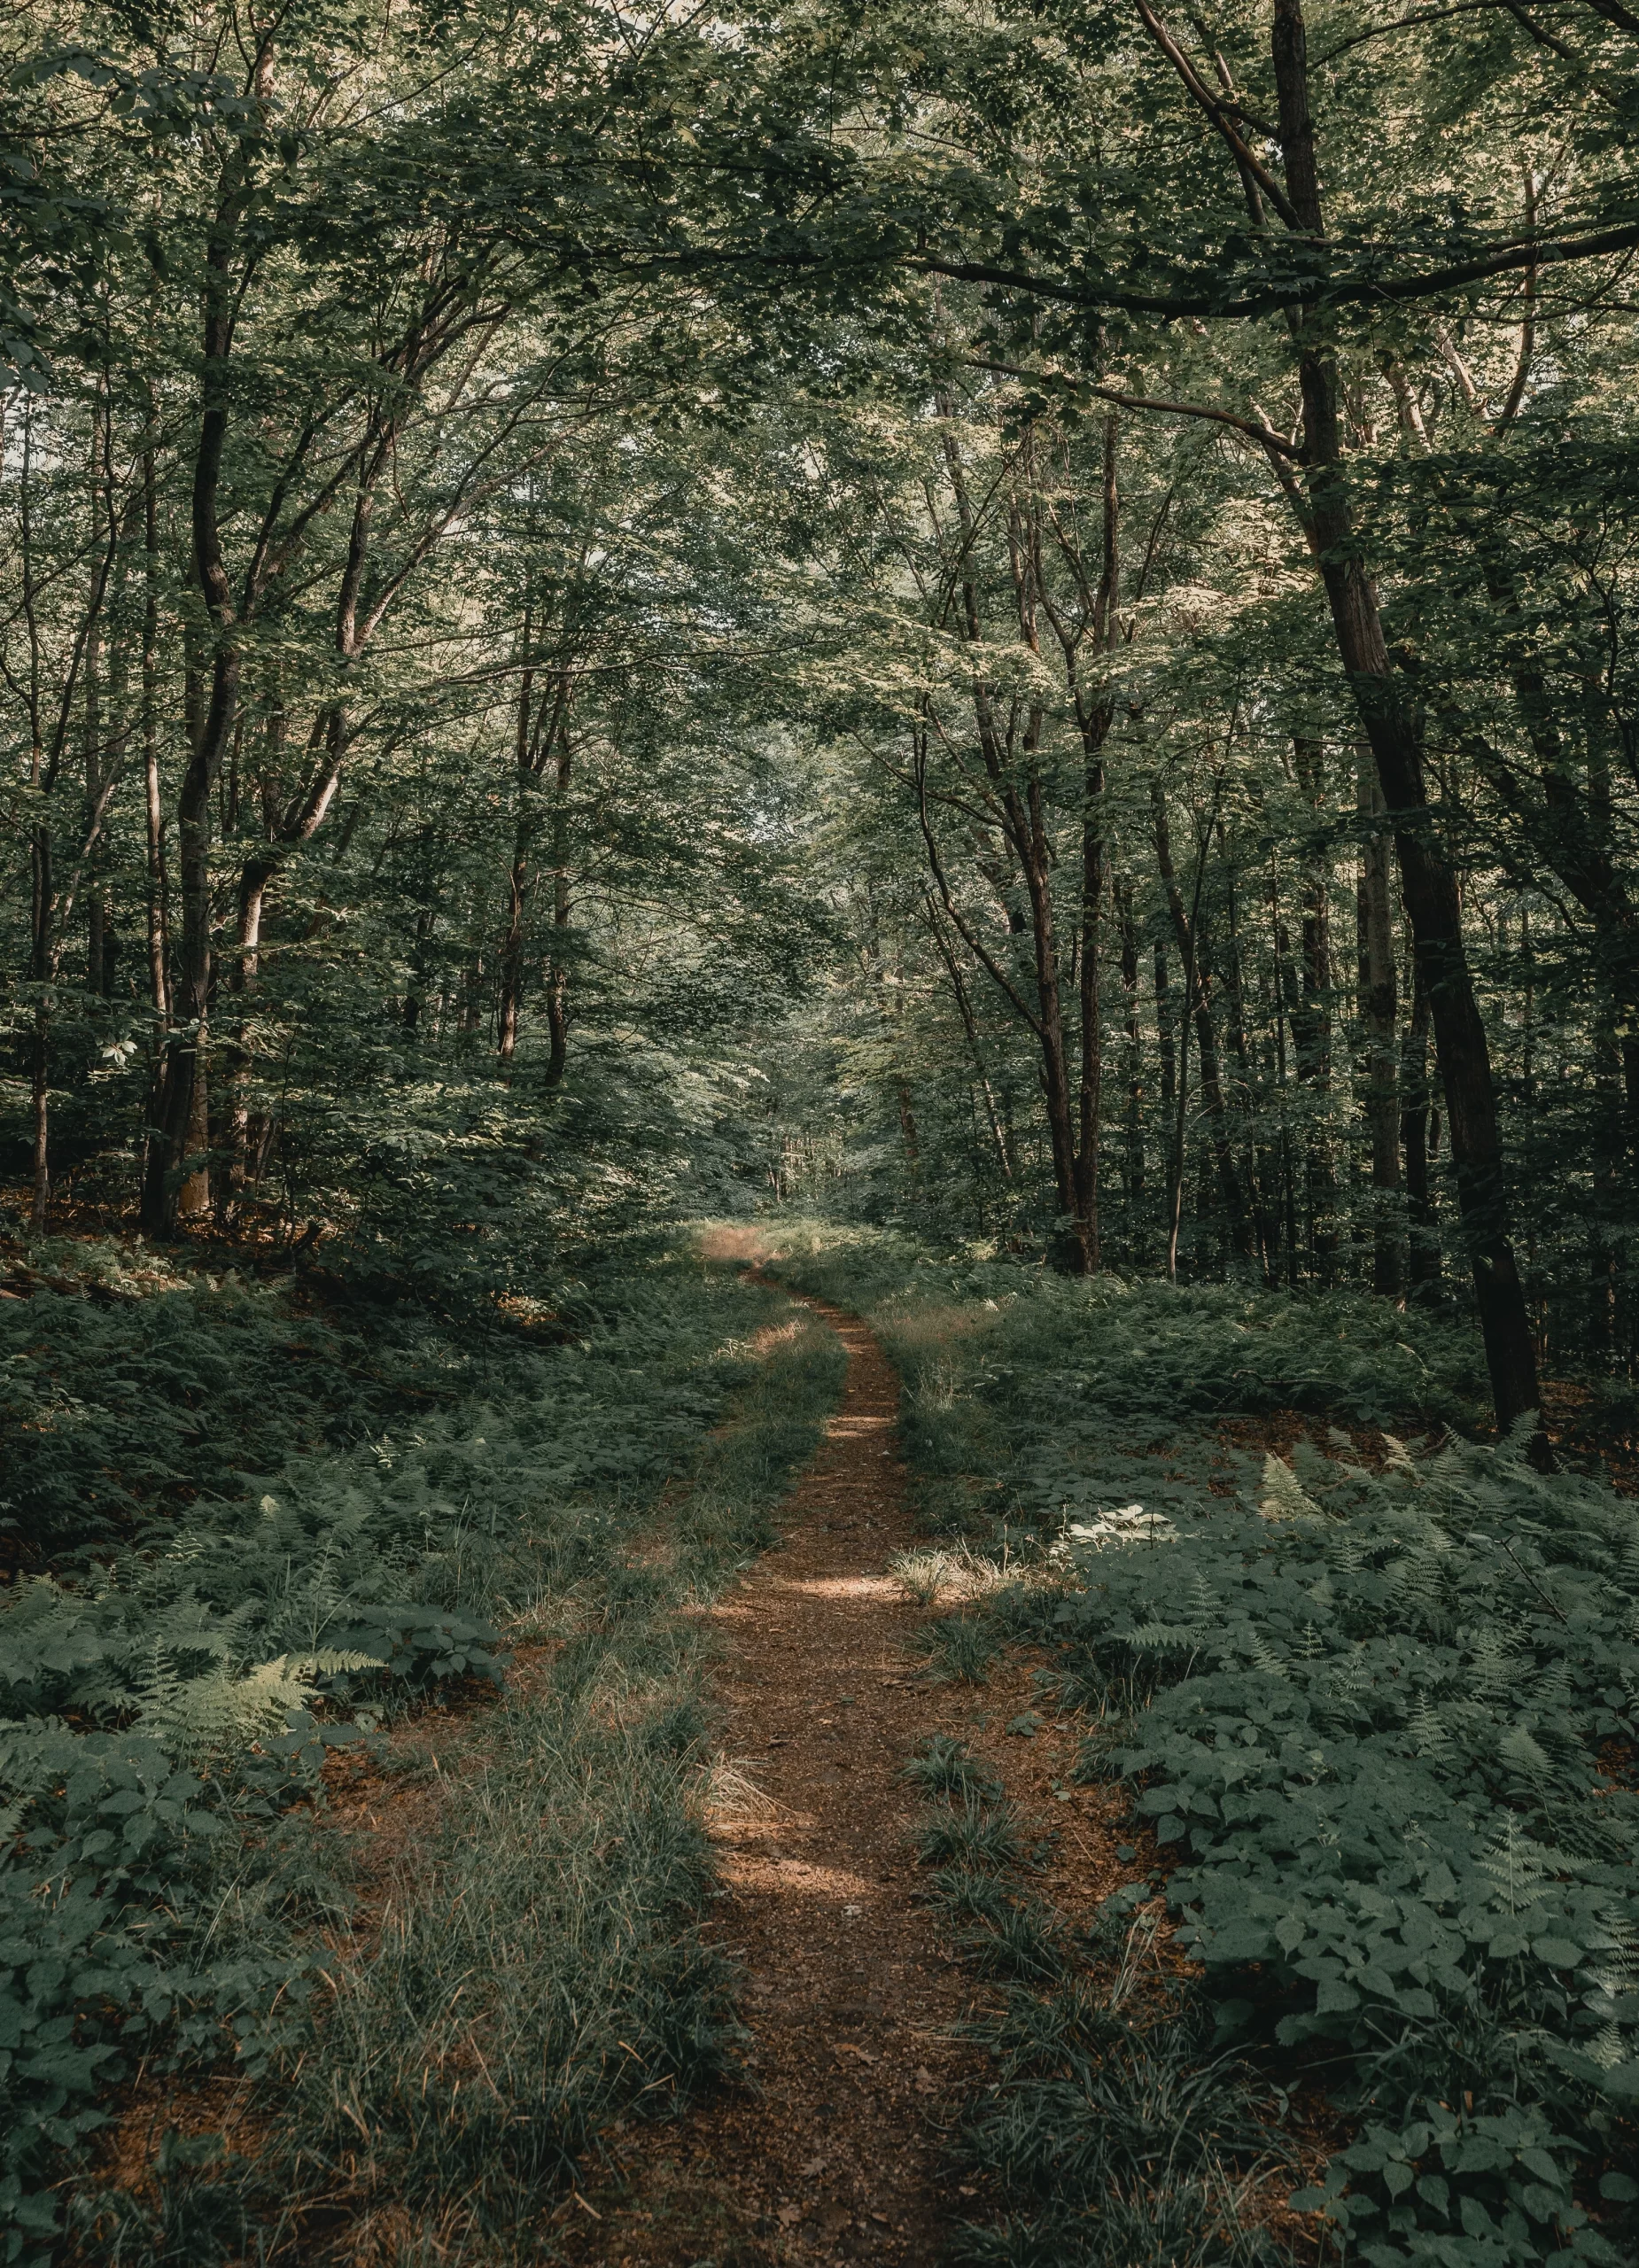 Willowemoc Creek, New York, USA Published on July 6, 2020 SONY, ILCE-7M3 Free to use under the Unsplash License Walking through the woods (IG: @clay.banks)